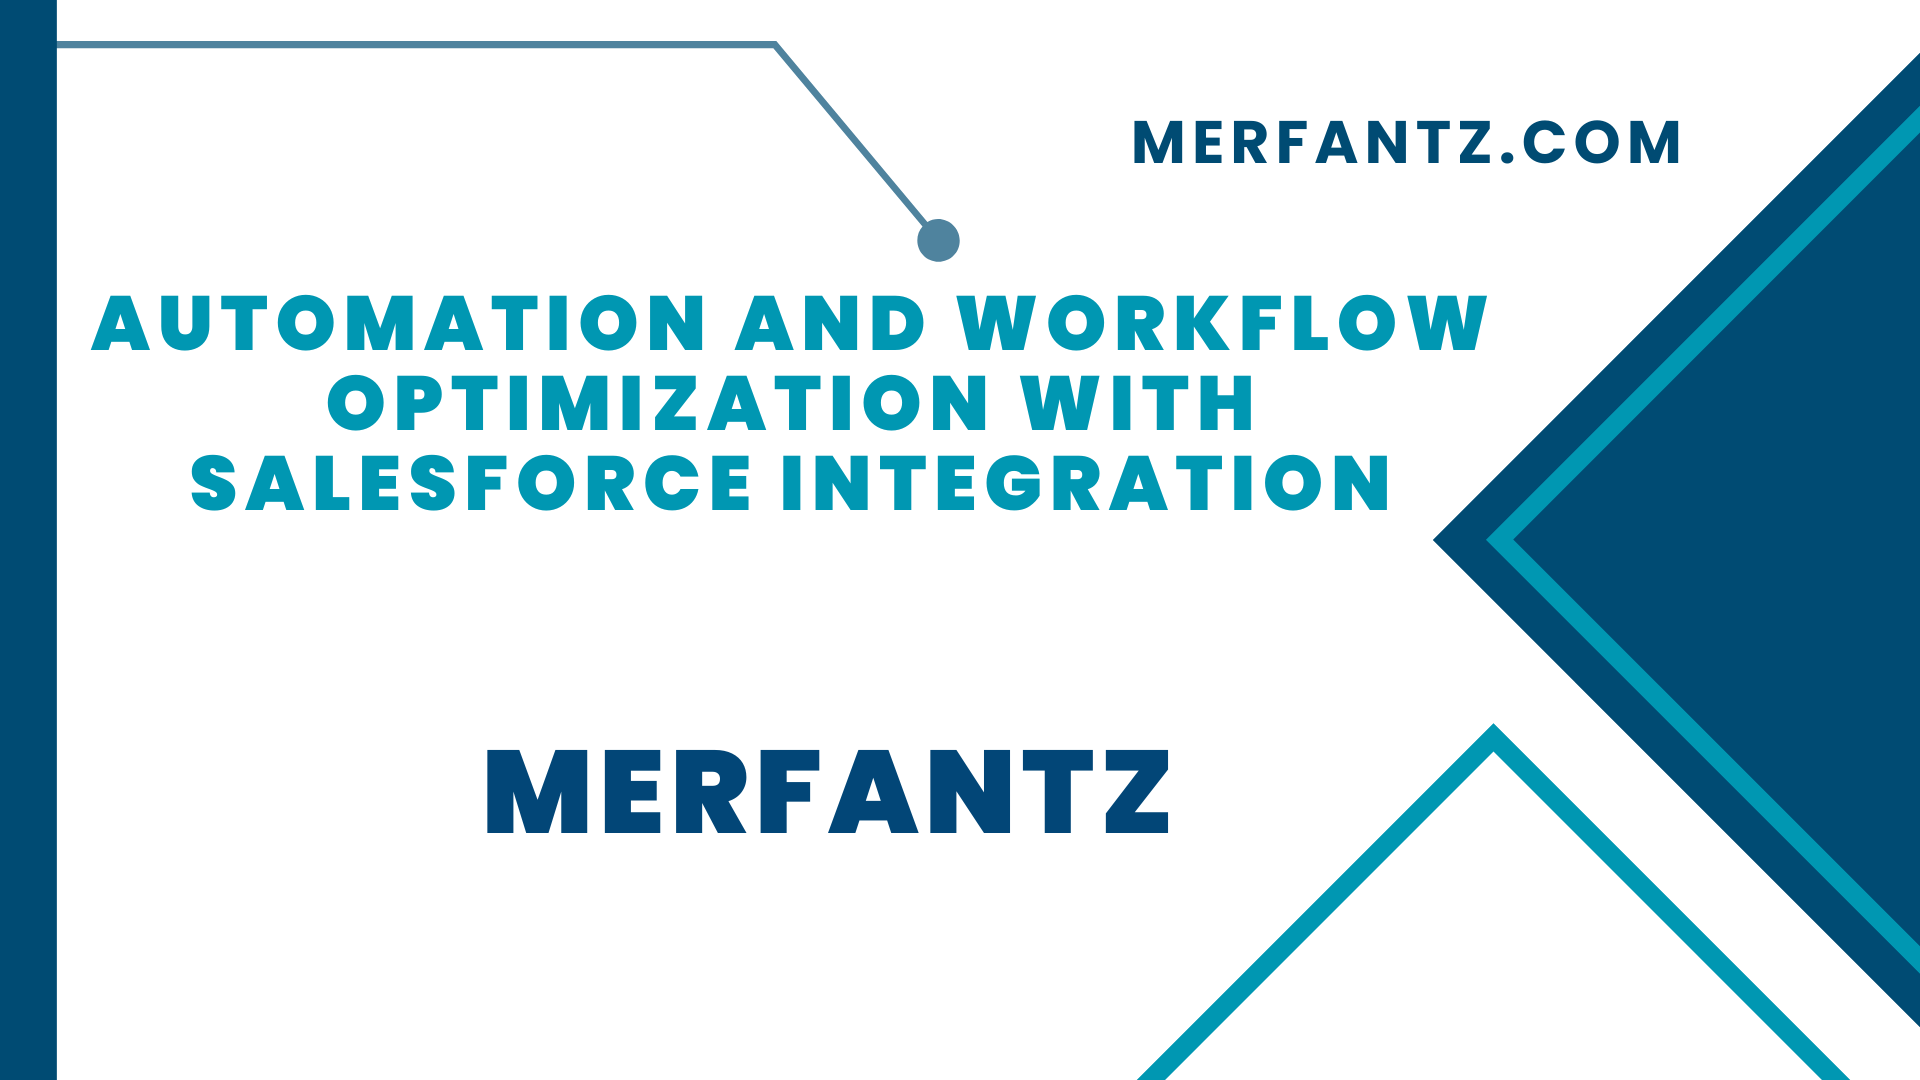 Automation and Workflow Optimization with Salesforce Integration